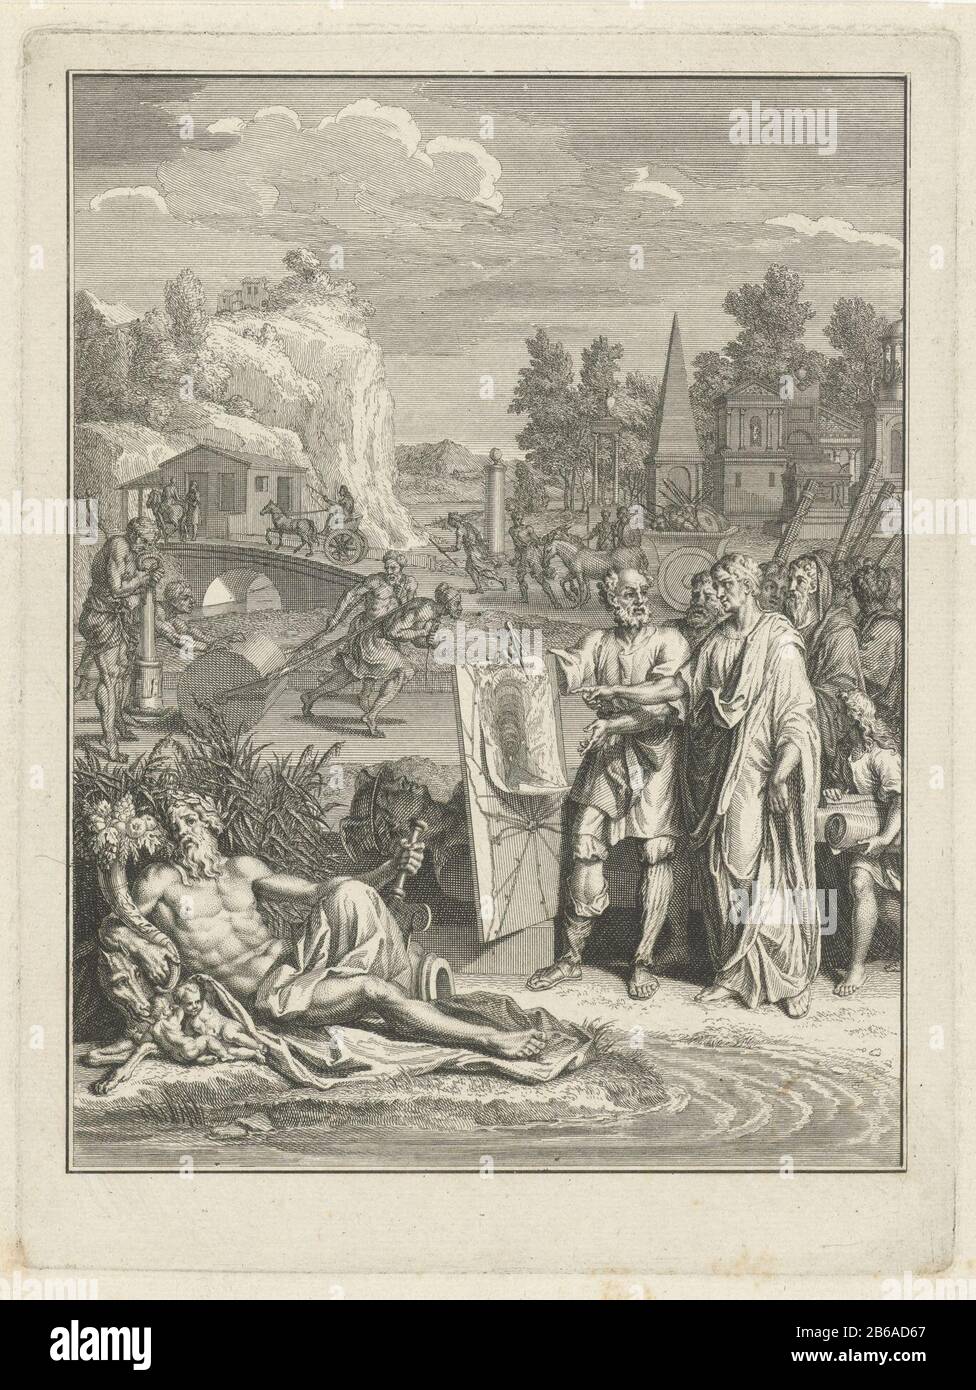 Allegory on the way to Rome Landscape with in the foreground a Roman engineer showing a road map to a magistrate. Links to the fore the Tiber, with Romulus, Remus and the wolf resting by the side of the river. In the background men leveling a road. With an empty marge. Manufacturer : printmaker: Bernard Picartnaar own design: Bernard PicartPlaats manufacture: Amsterdam Date: 1728 Physical features: etching and engra; test pressure measurements: plate edge: H 220 mm × W 159 mmToelichtingTweede of this print condition used as a title page for: Bergier, Nicolas. Histoire des grands chemins de l'e Stock Photo